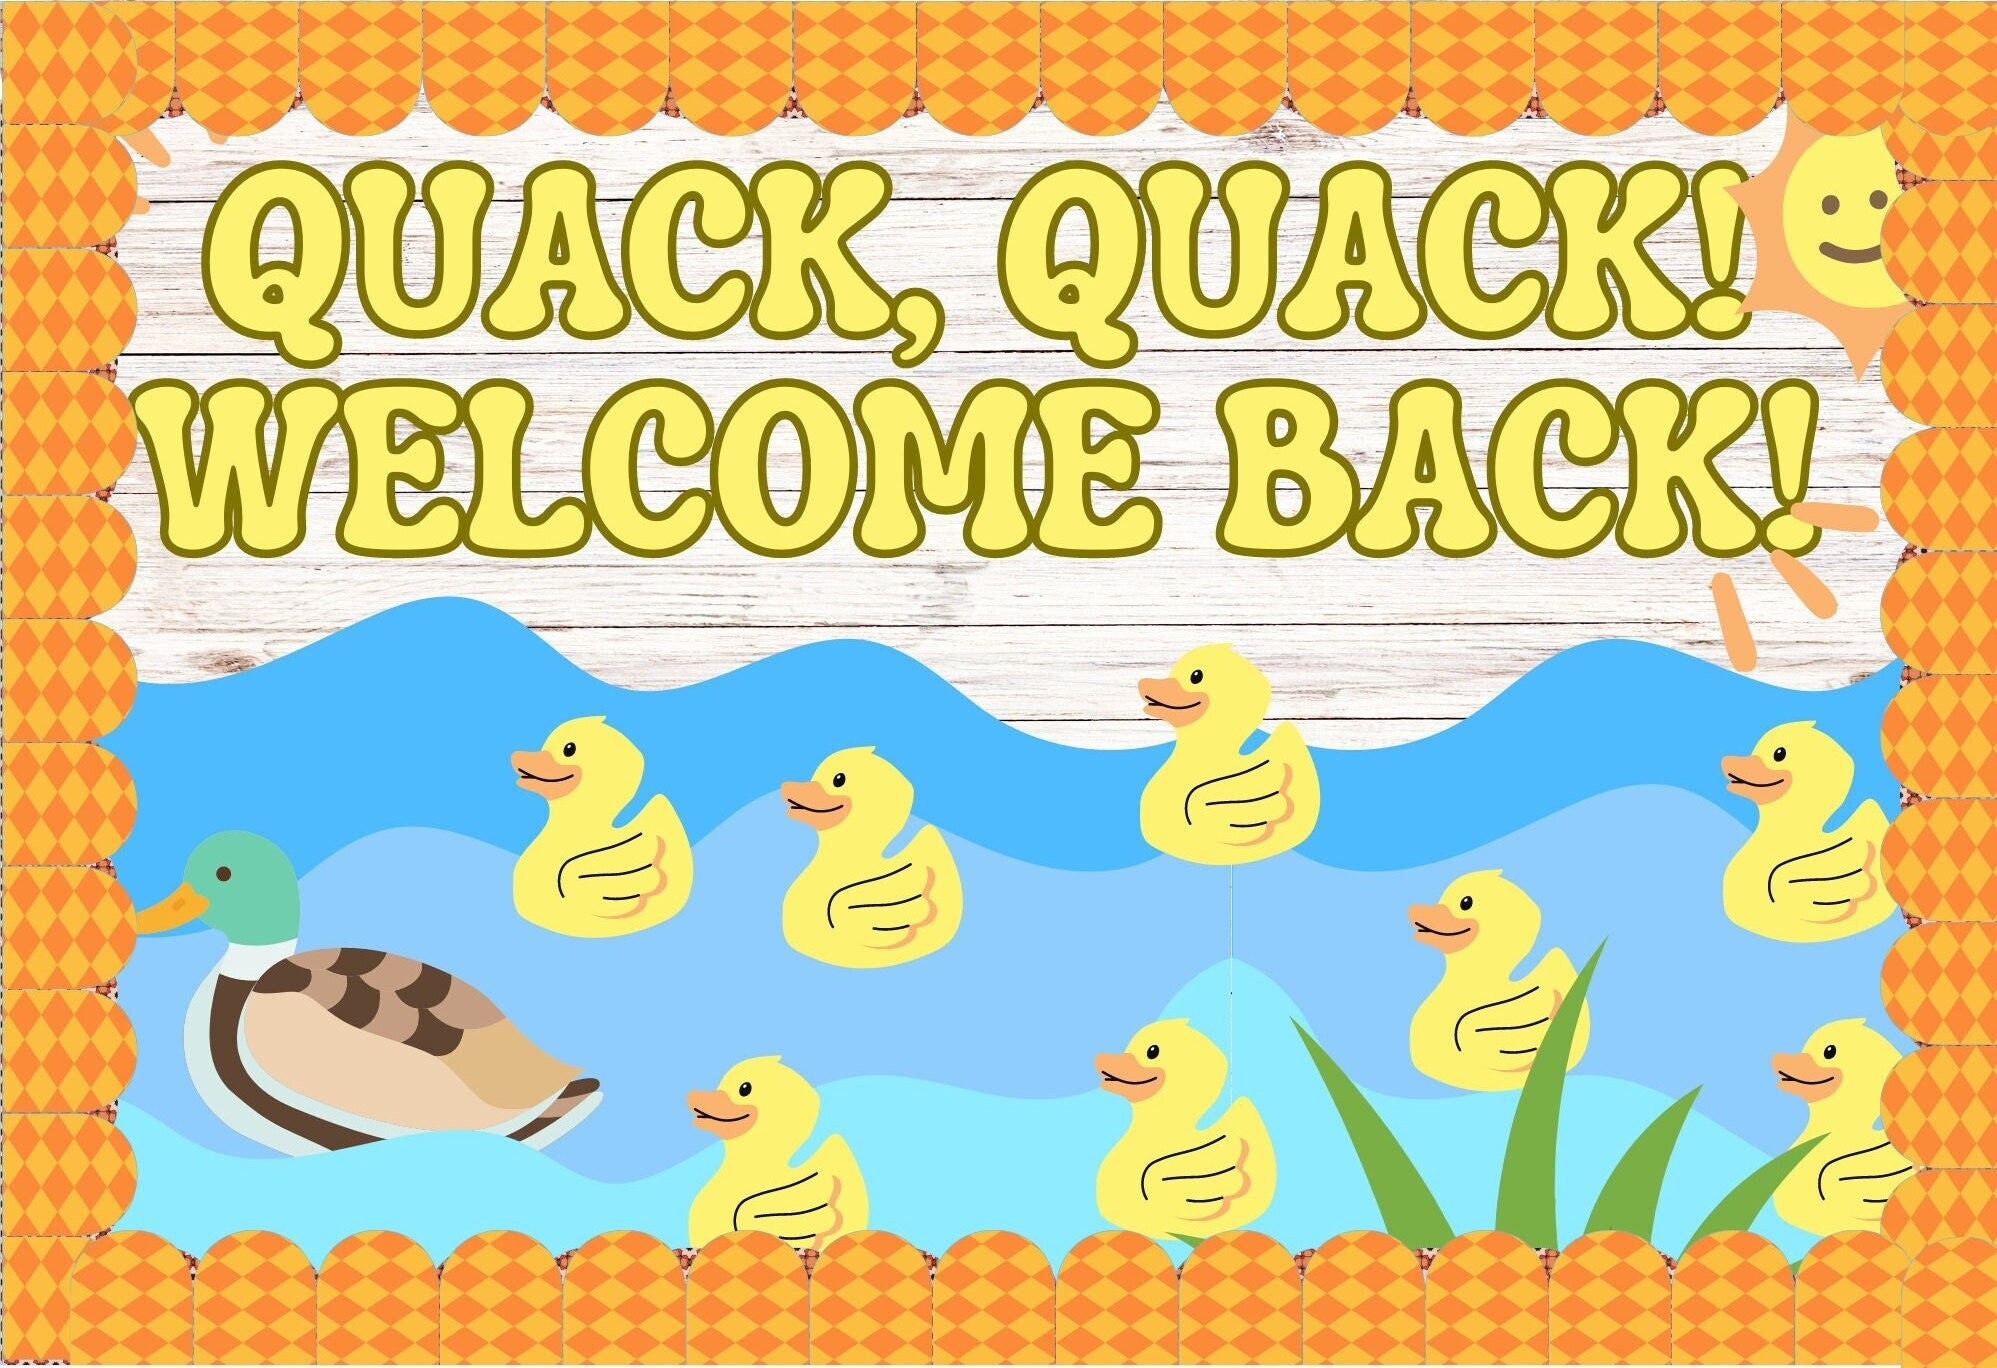 Duck Life - Holy quack! Duck Life Adventure is now FREE on